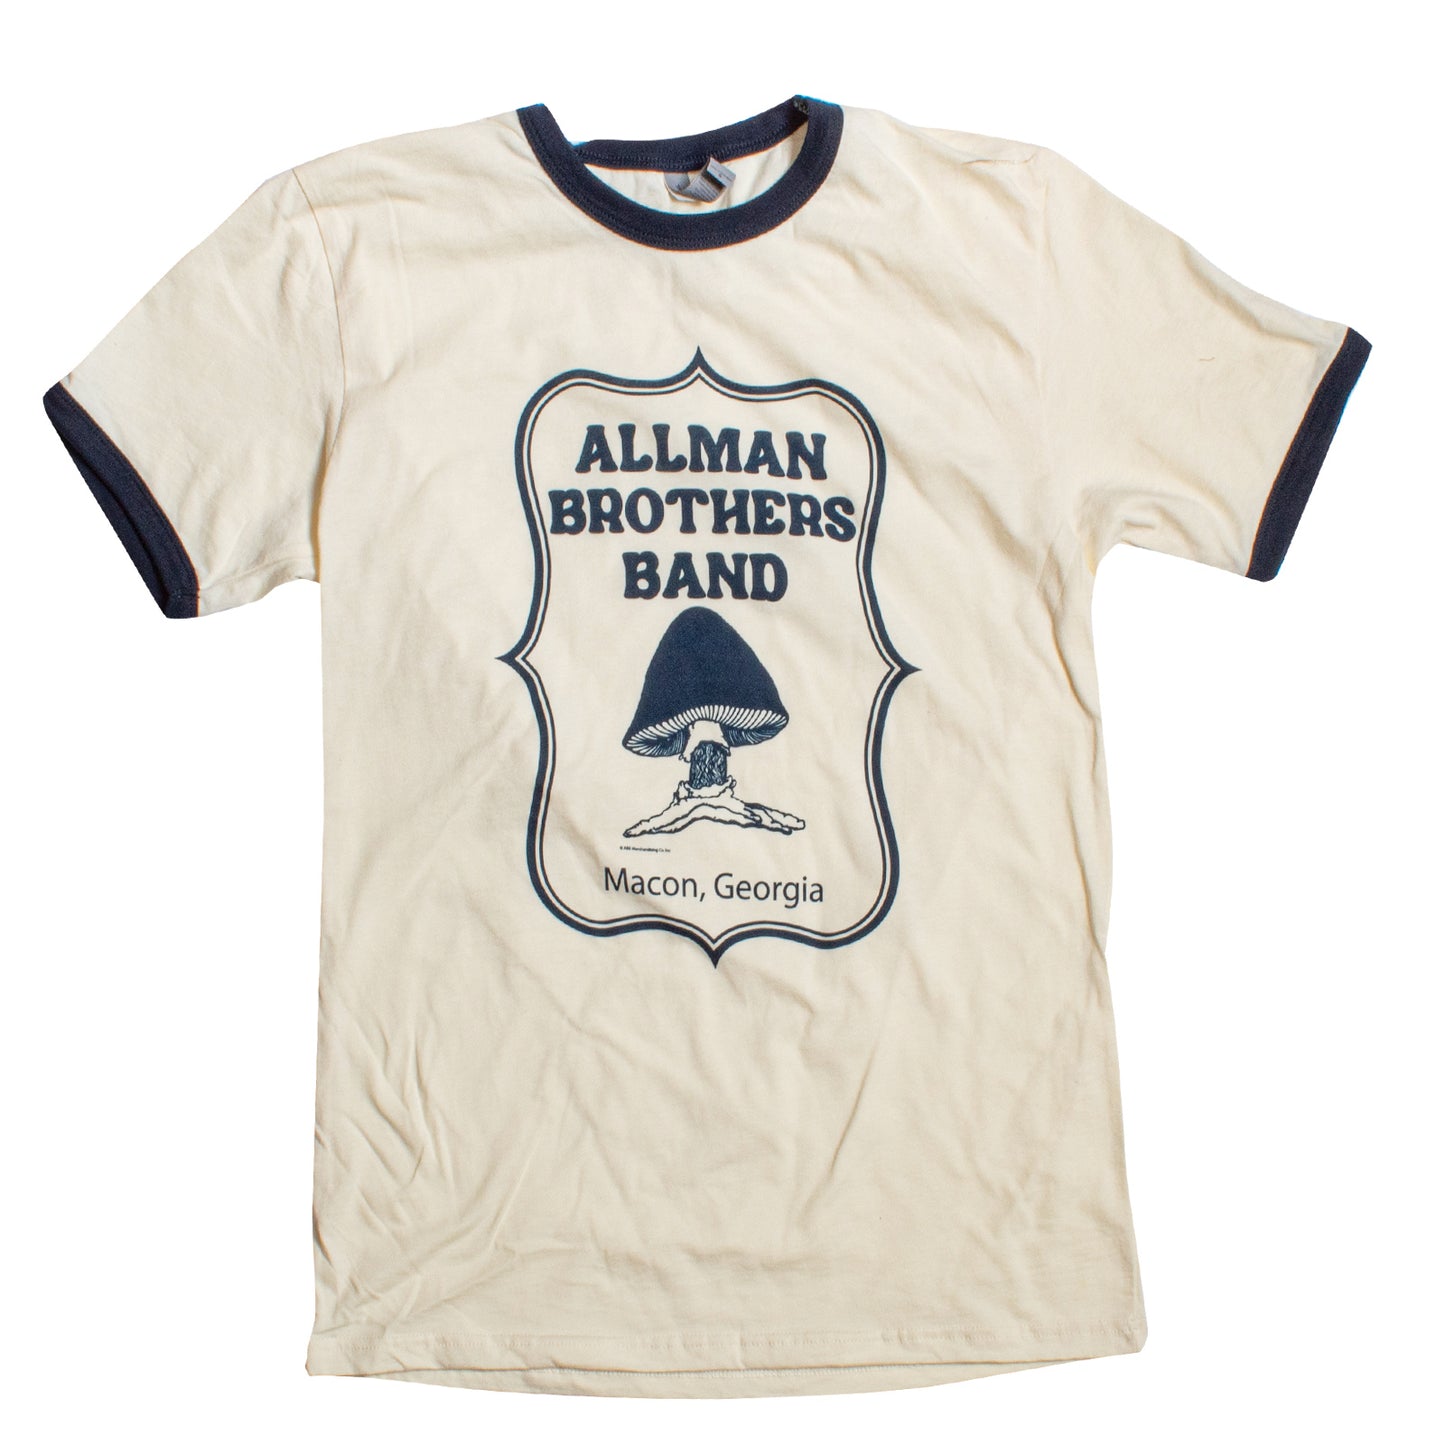 Allman Brothers Band Ringer Tee